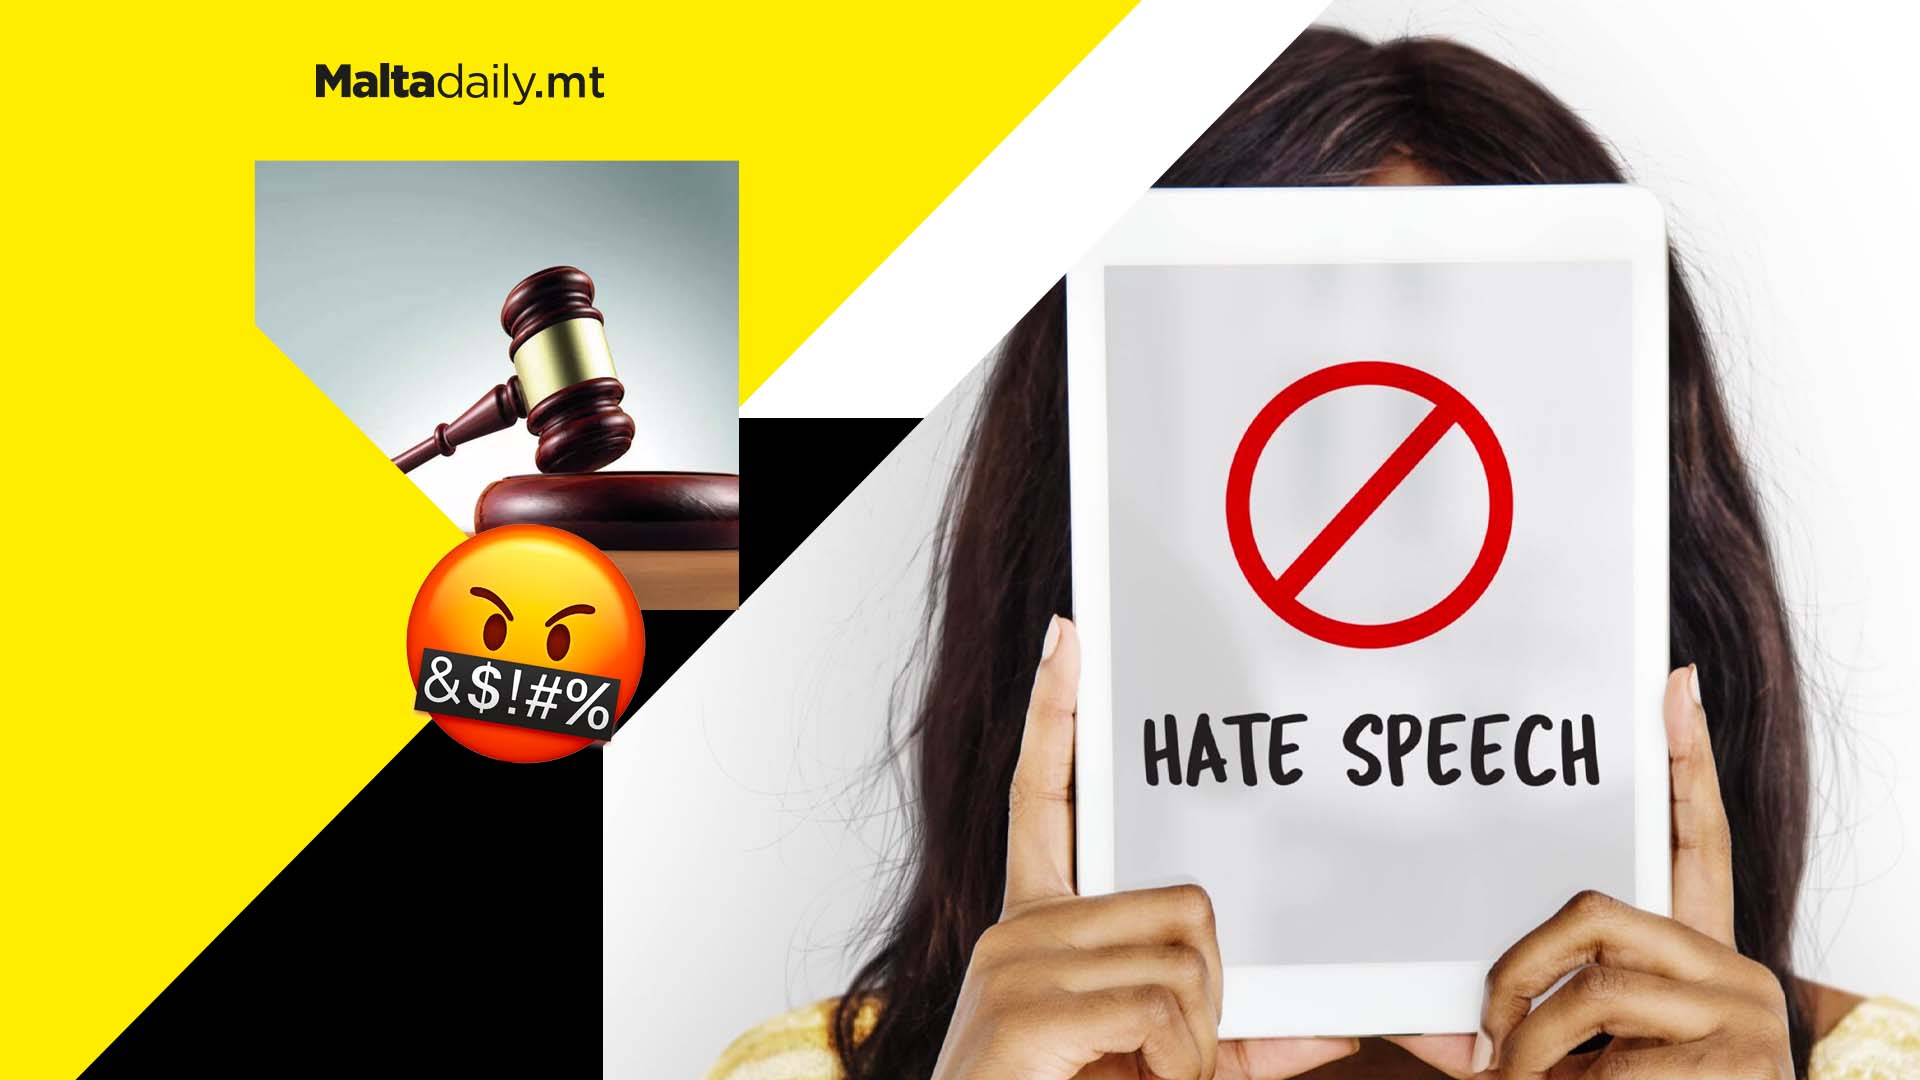 33 people taken to Maltese court for hate speech in 2021